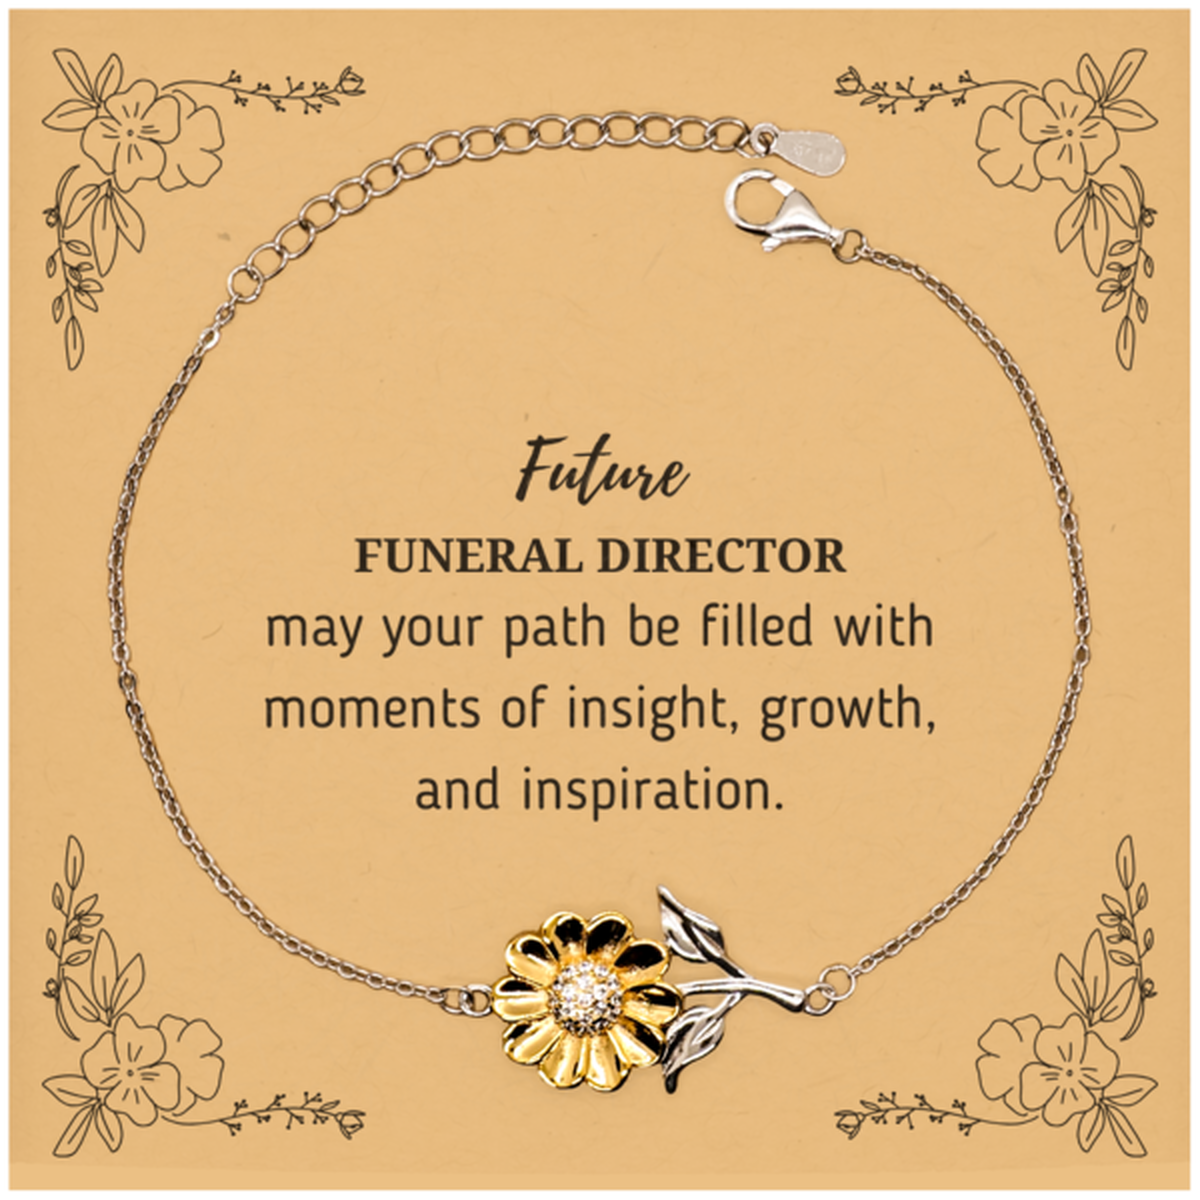 Future Funeral Director Gifts, May your path be filled with moments of insight, Graduation Gifts for New Funeral Director, Christmas Unique Sunflower Bracelet For Men, Women, Friends